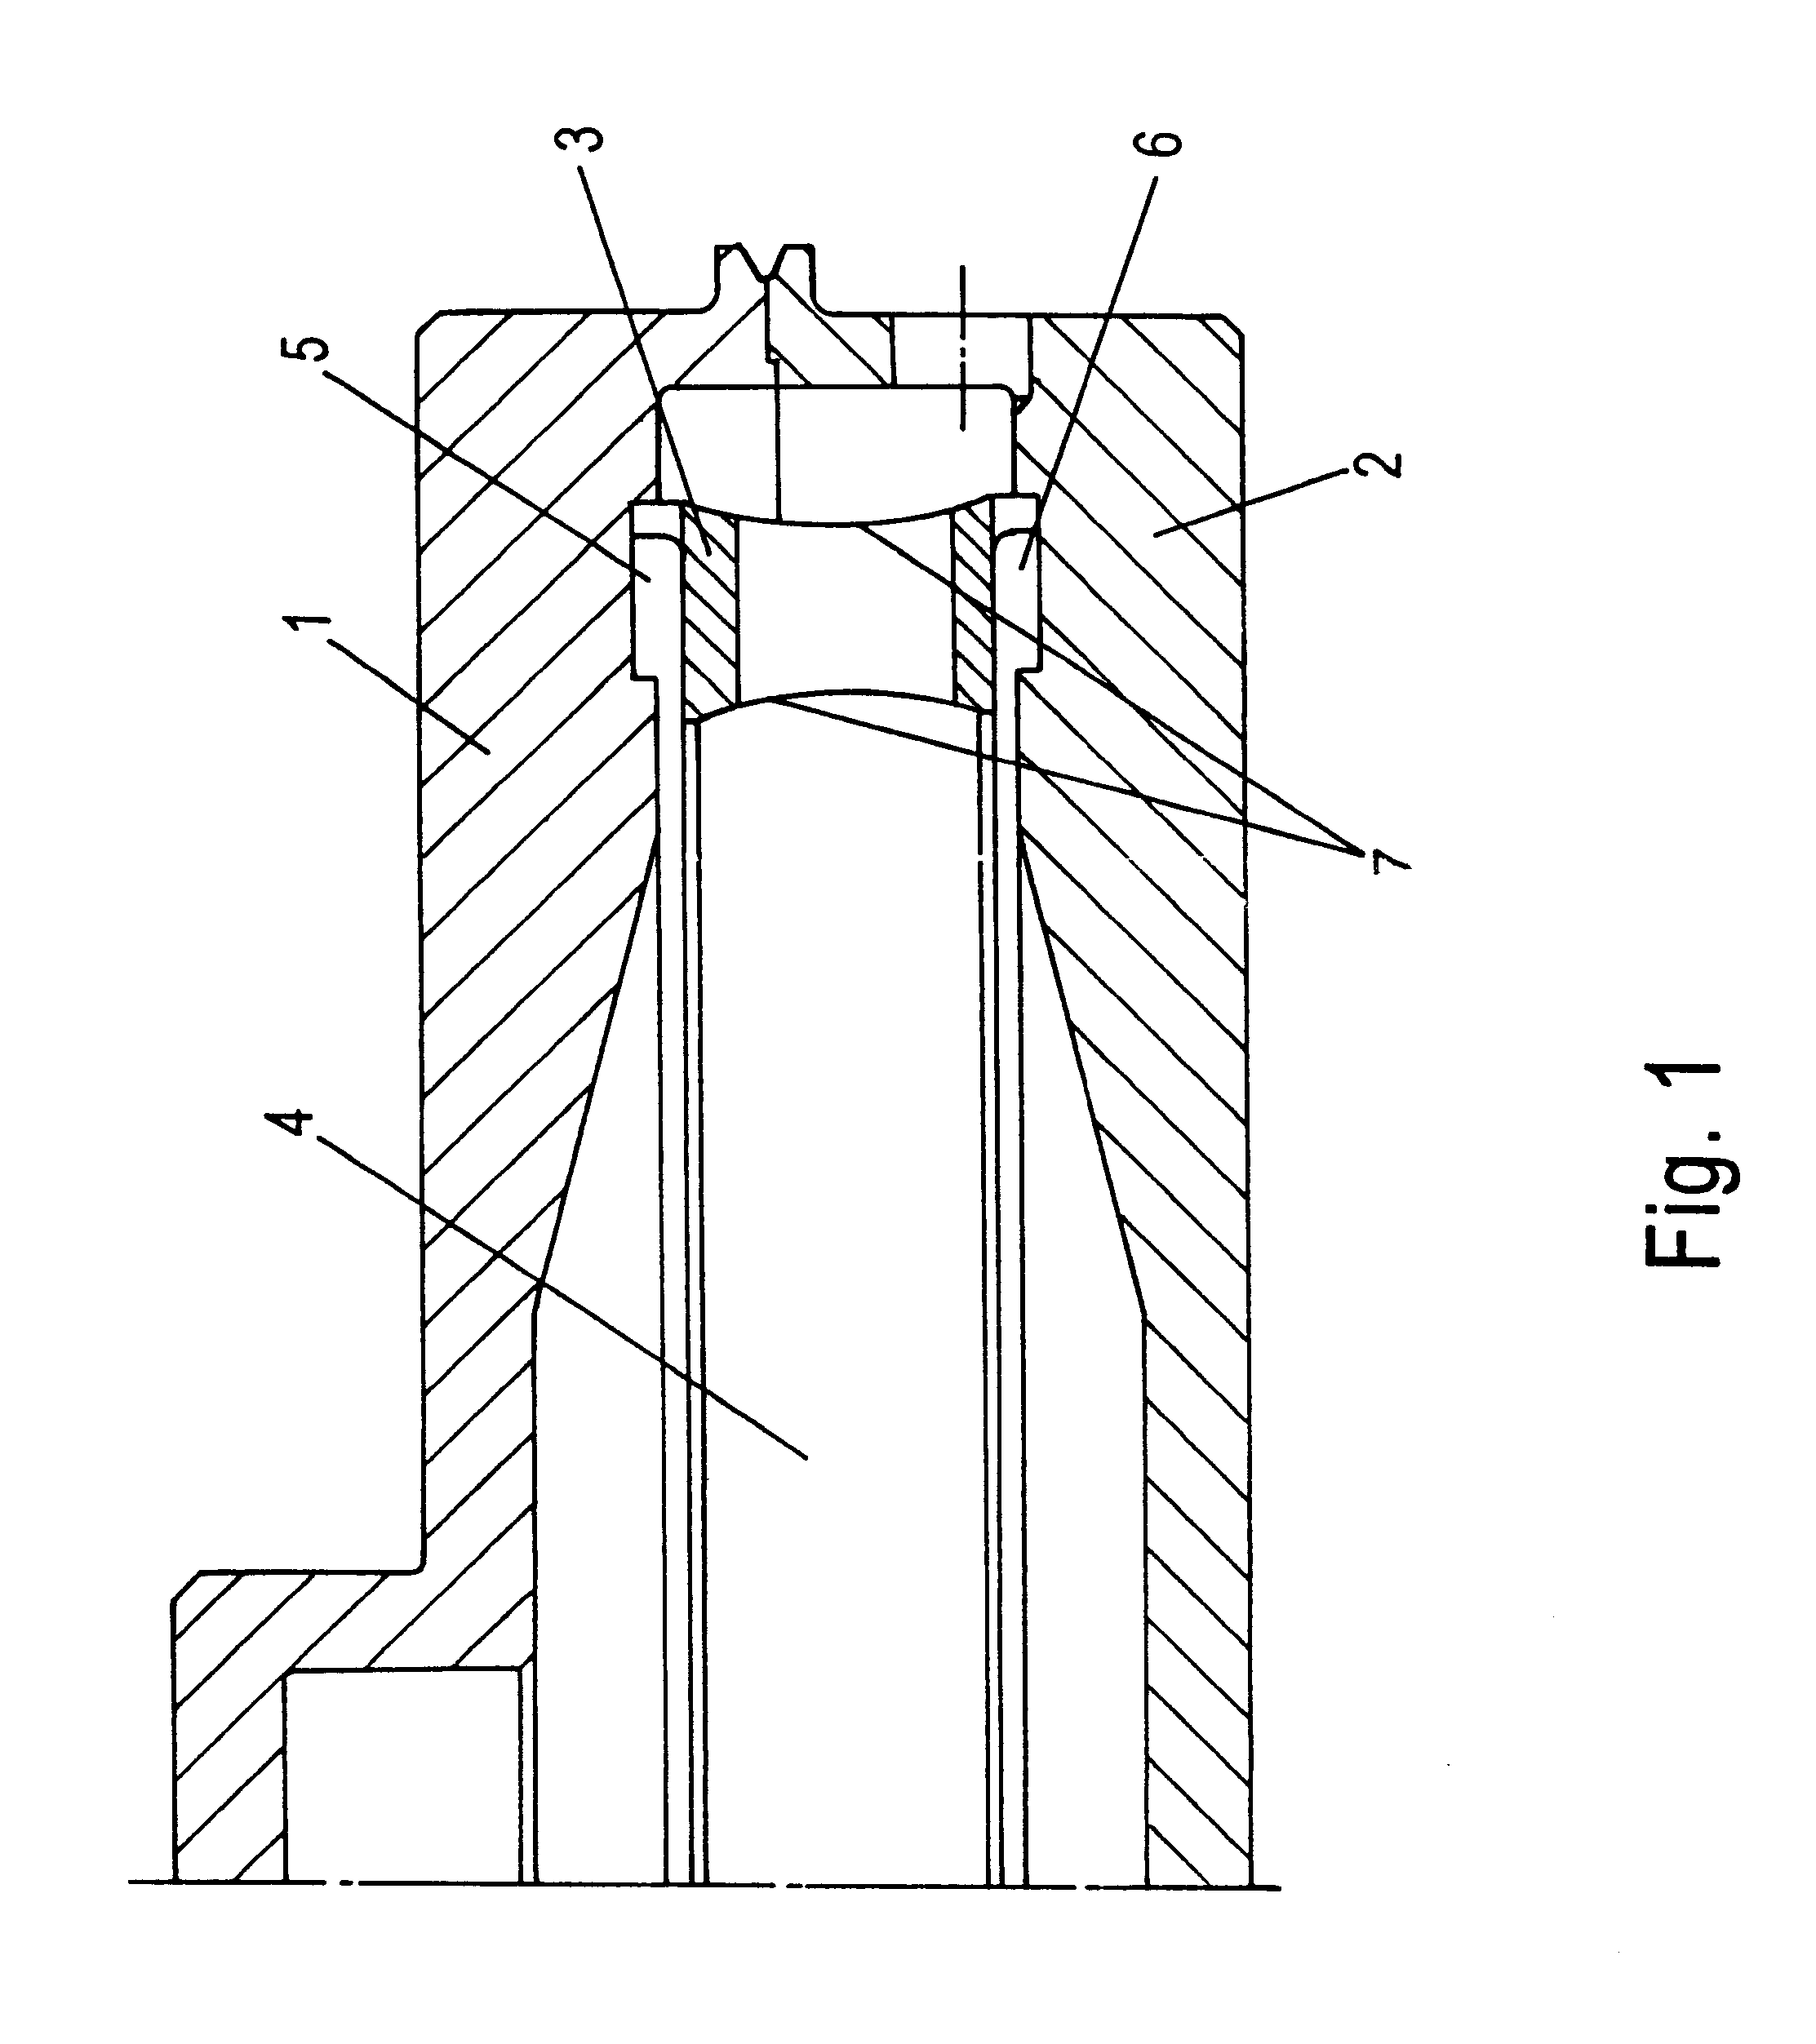 Method of manufacturing articles of complex shape using powder materials, and apparatus for implementing this method